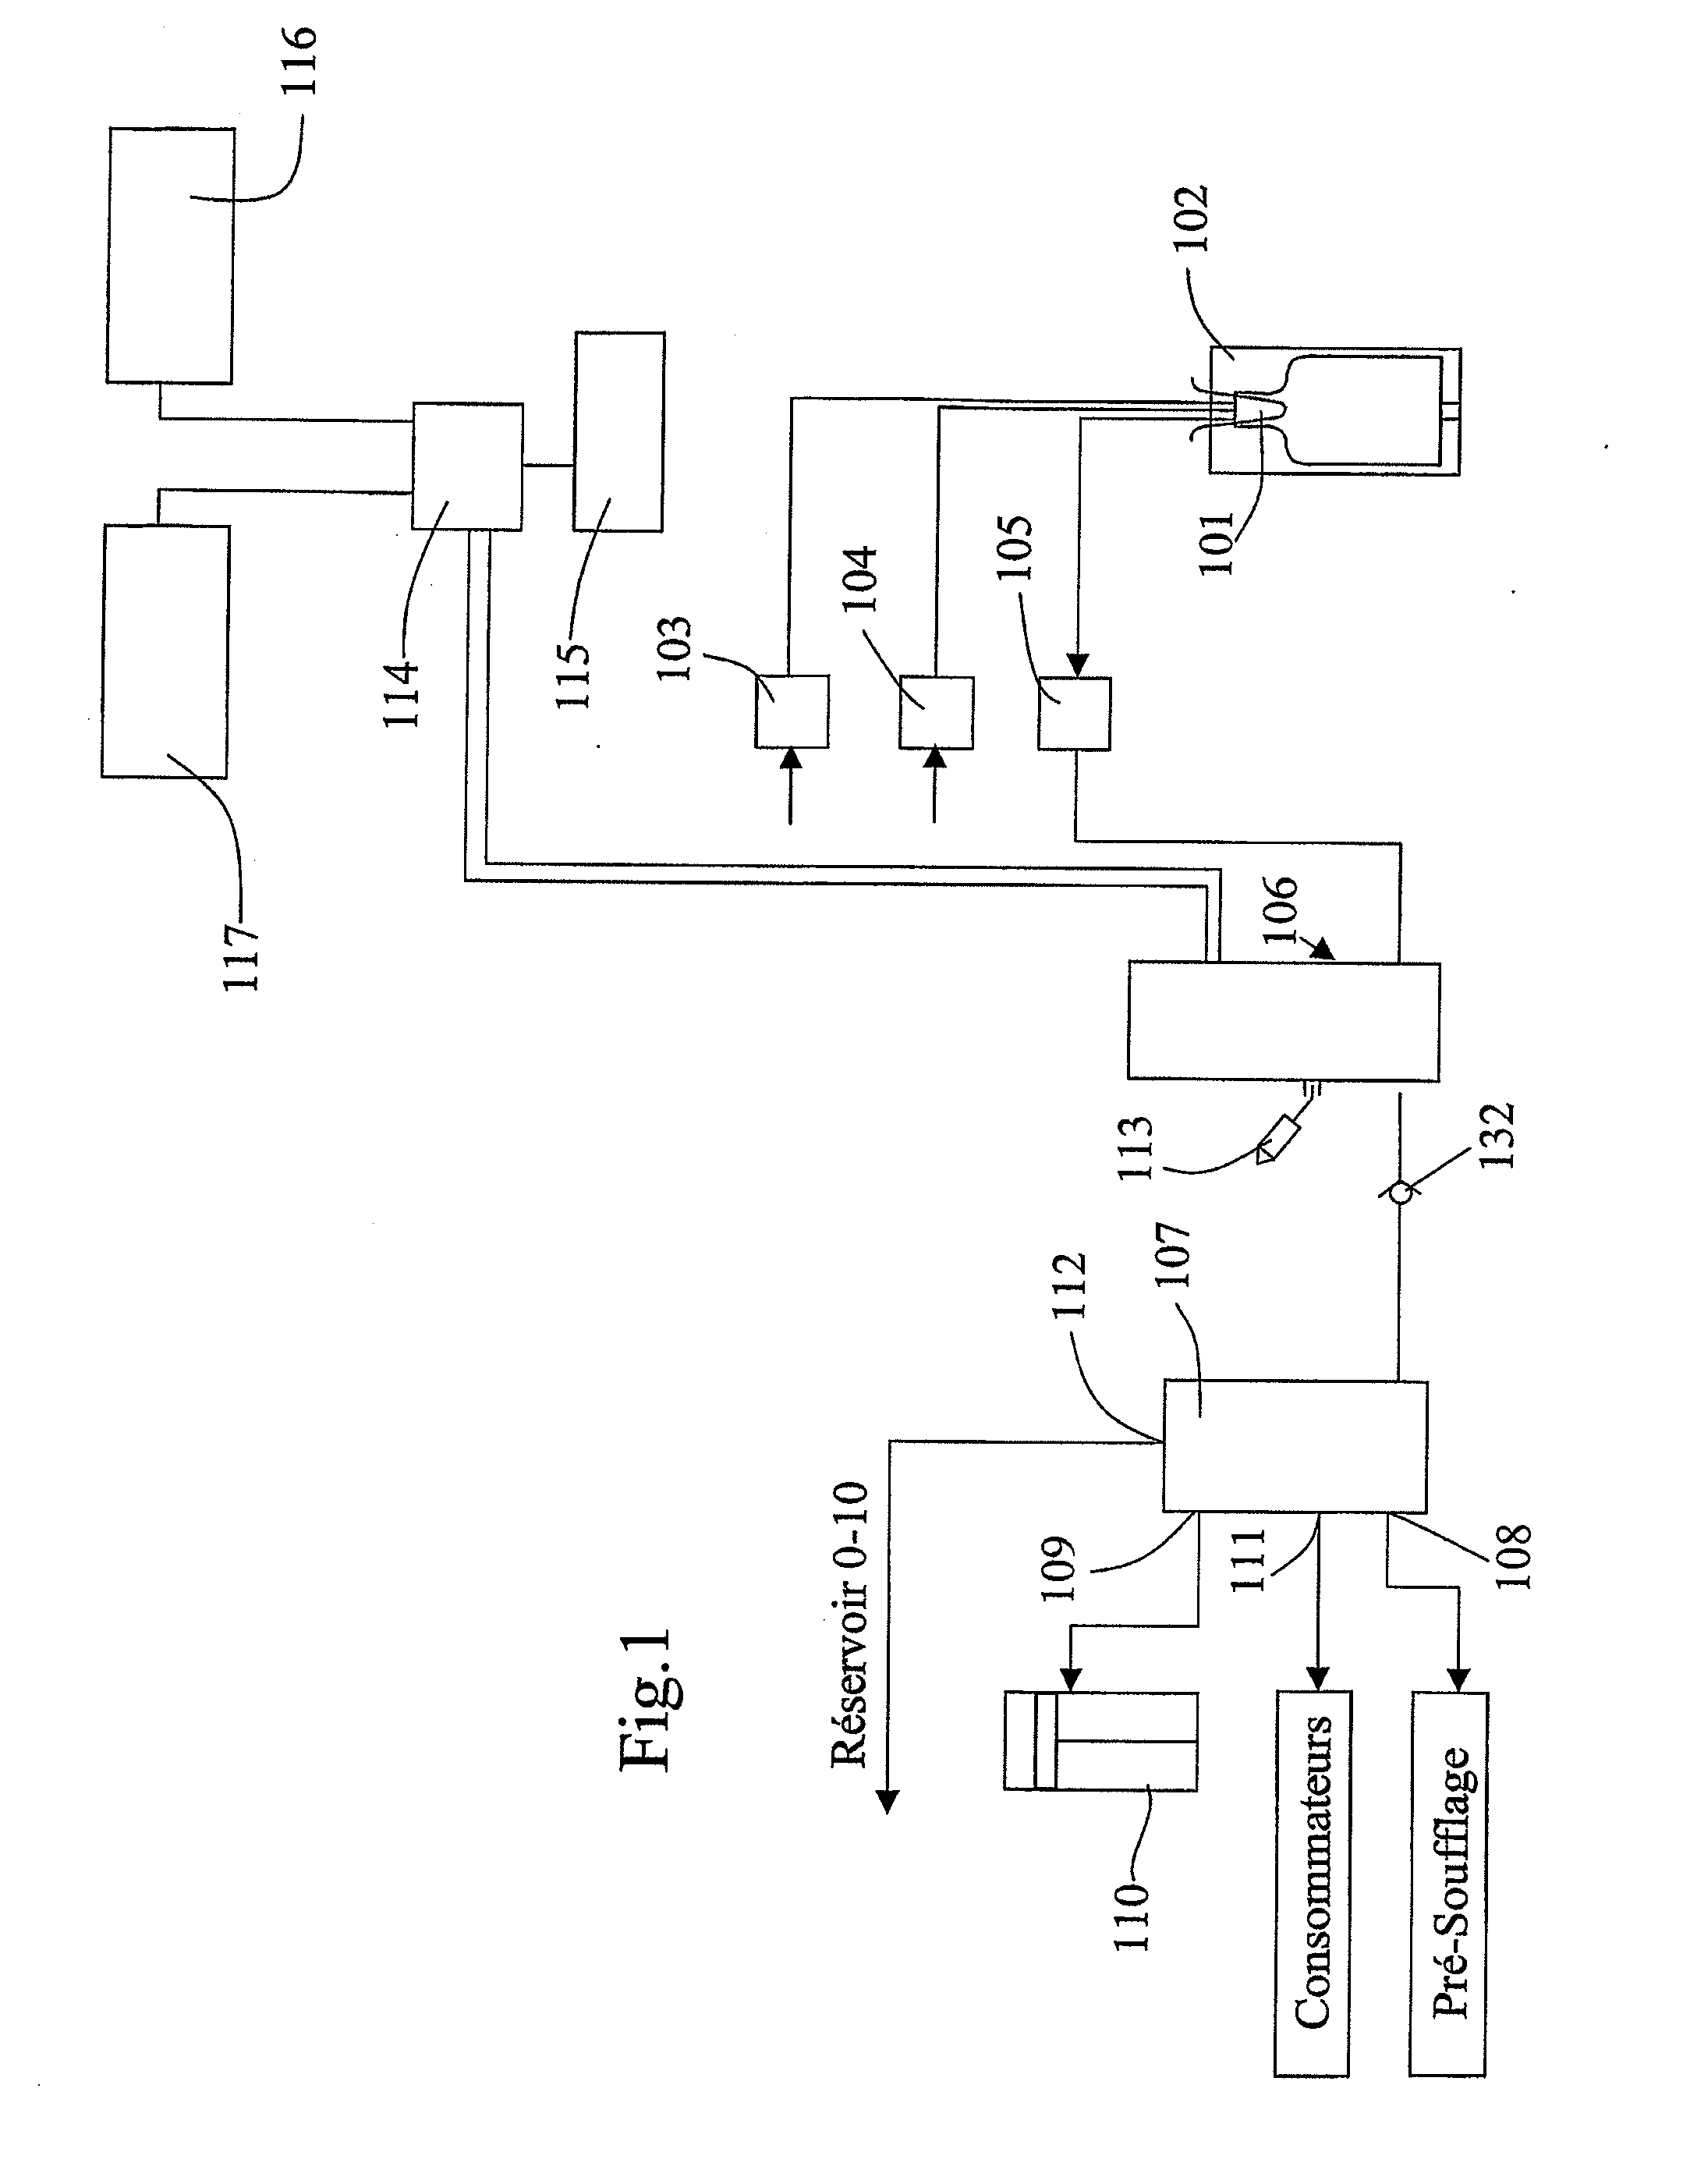 Method of gas blow forming packaging and device for implementing same